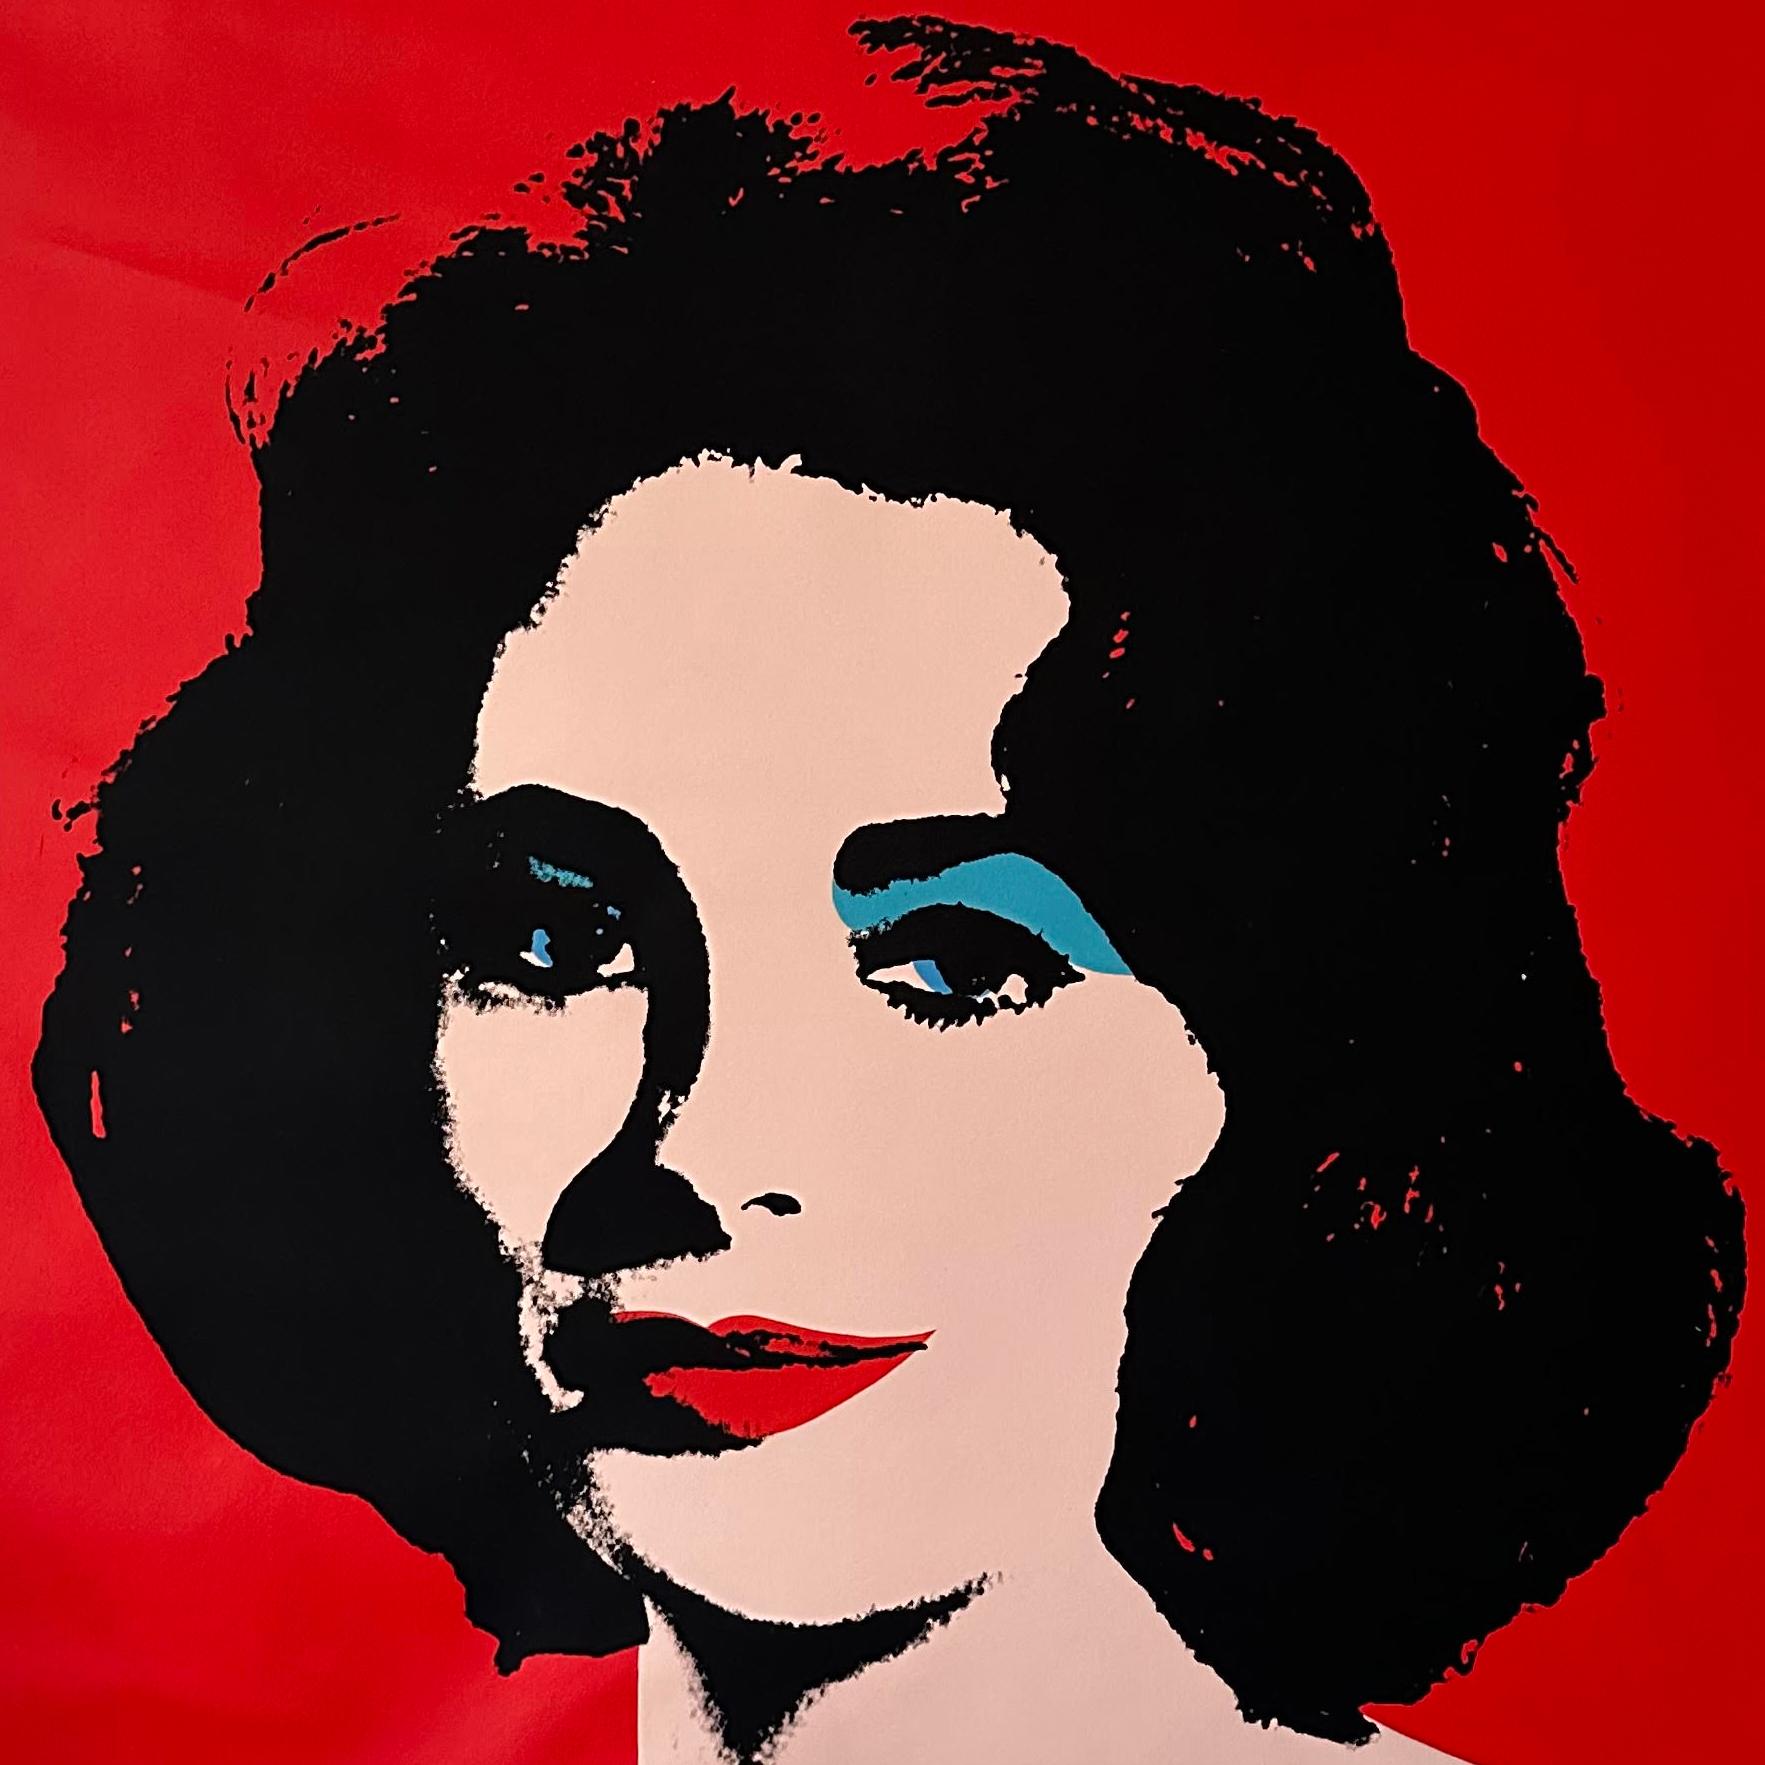 Denied Warhol Red Liz Painting on canvas by Charles Lutz
Silkscreen and acrylic on canvas with the artist's Denied stamp of the Andy Warhol Art Authentication Board. 
40 x 40" inches 
2008

Lutz's 2007 ''Warhol Denied'' series gained international